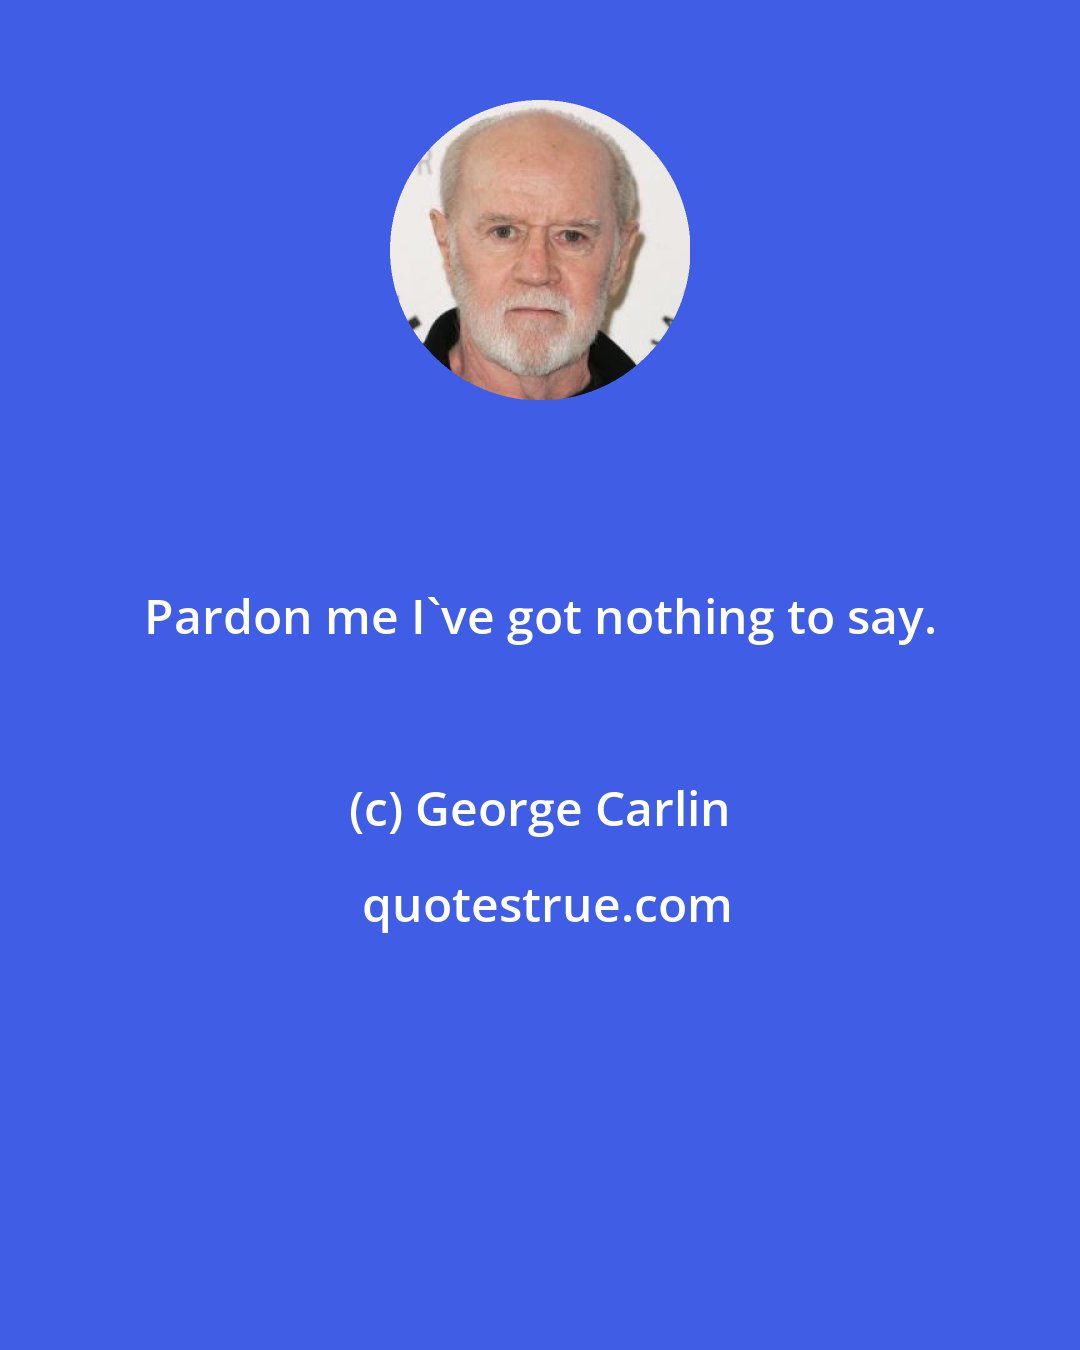 George Carlin: Pardon me I've got nothing to say.